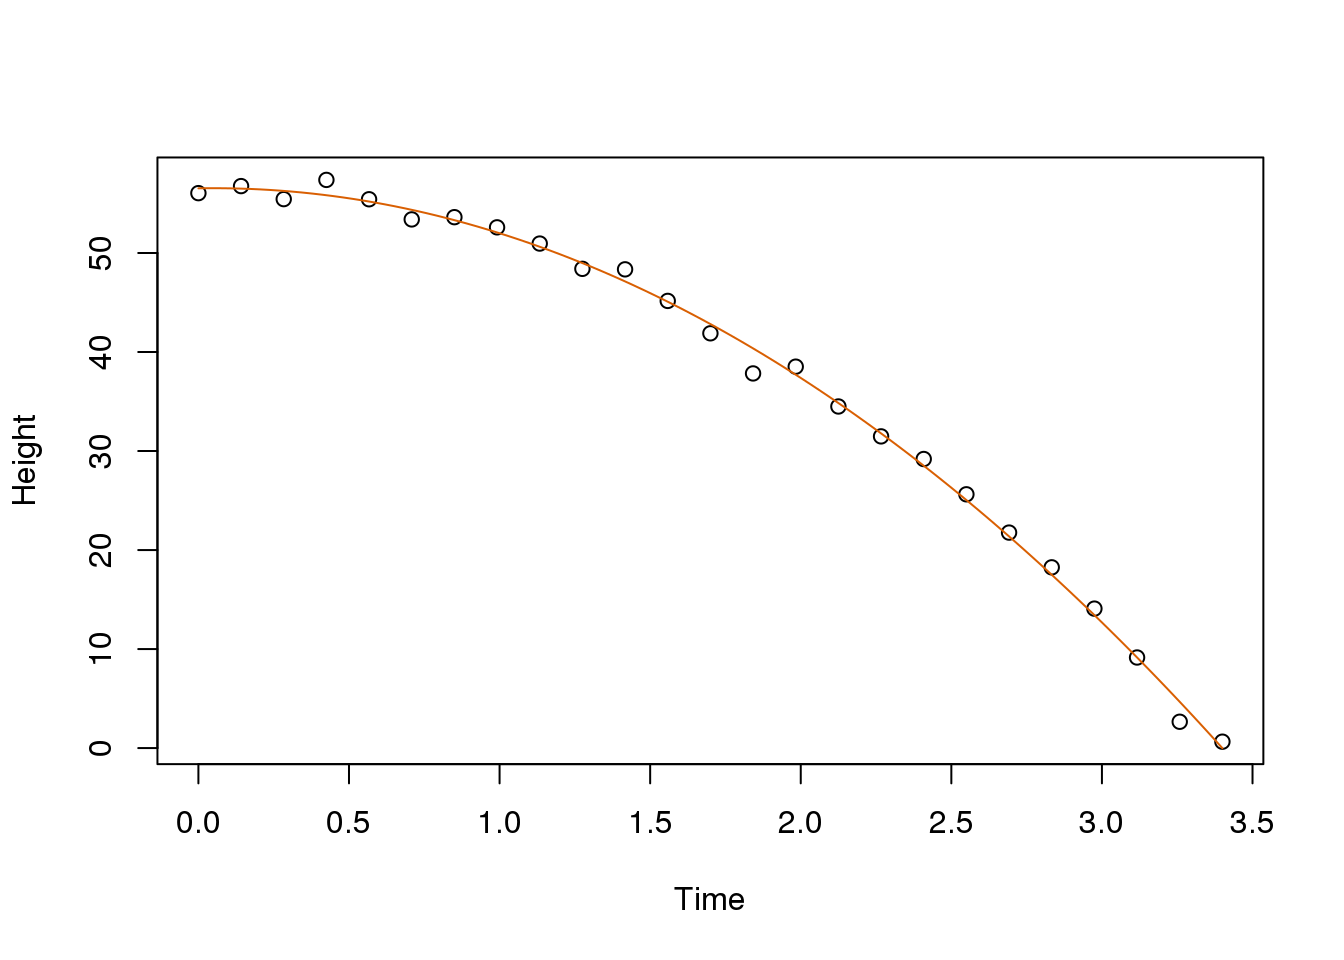 Fitted parabola to simulated data for distance travelled versus time of falling object measured with error.